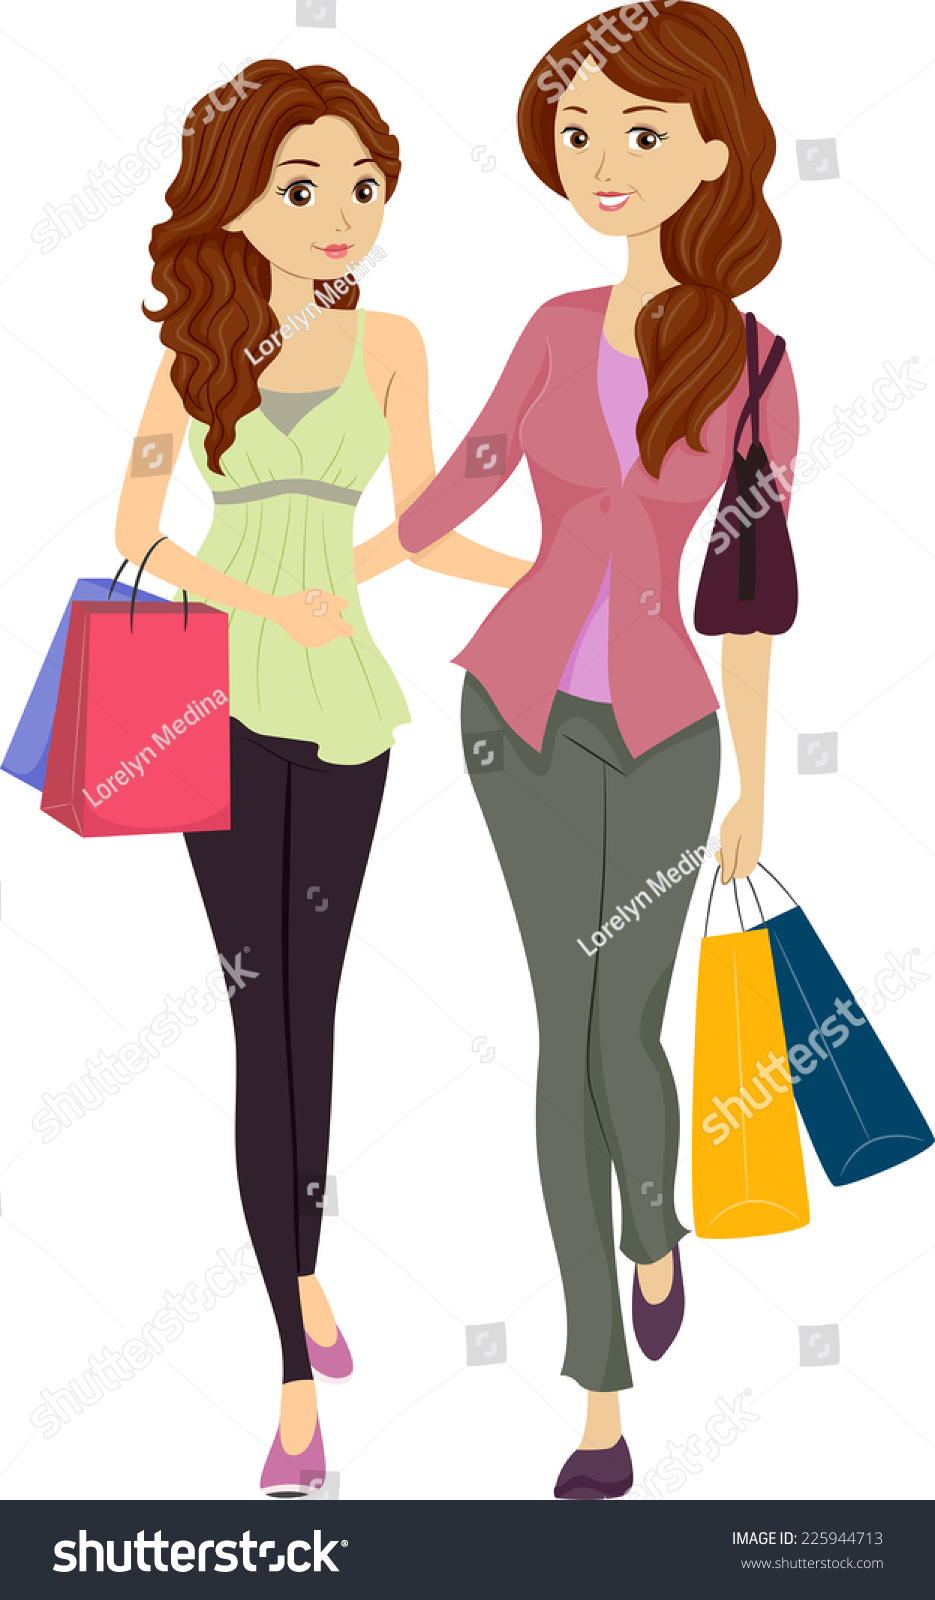 Illustration Featuring Mom Daughter Shopping Together Stock Vector ...